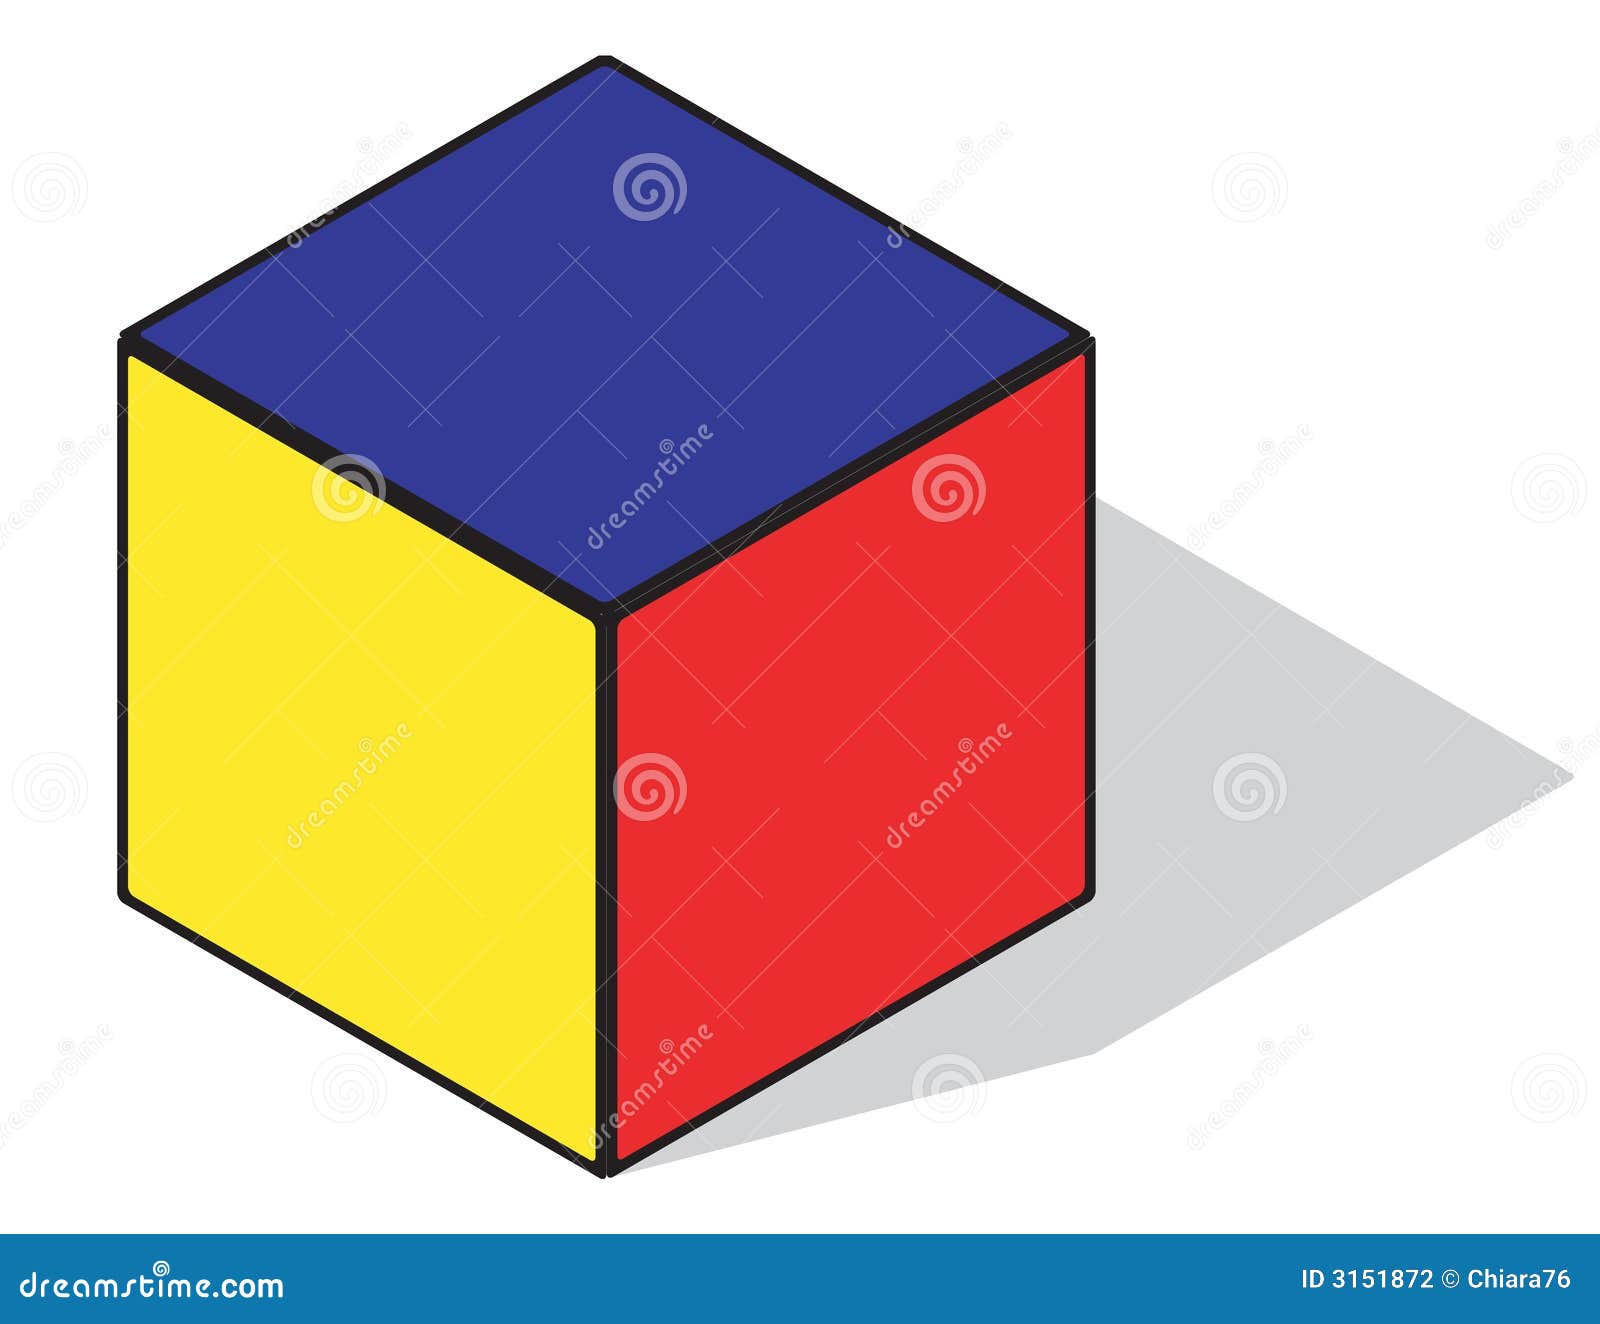 Primary Color Cube Stock Photography - Image: 3151872